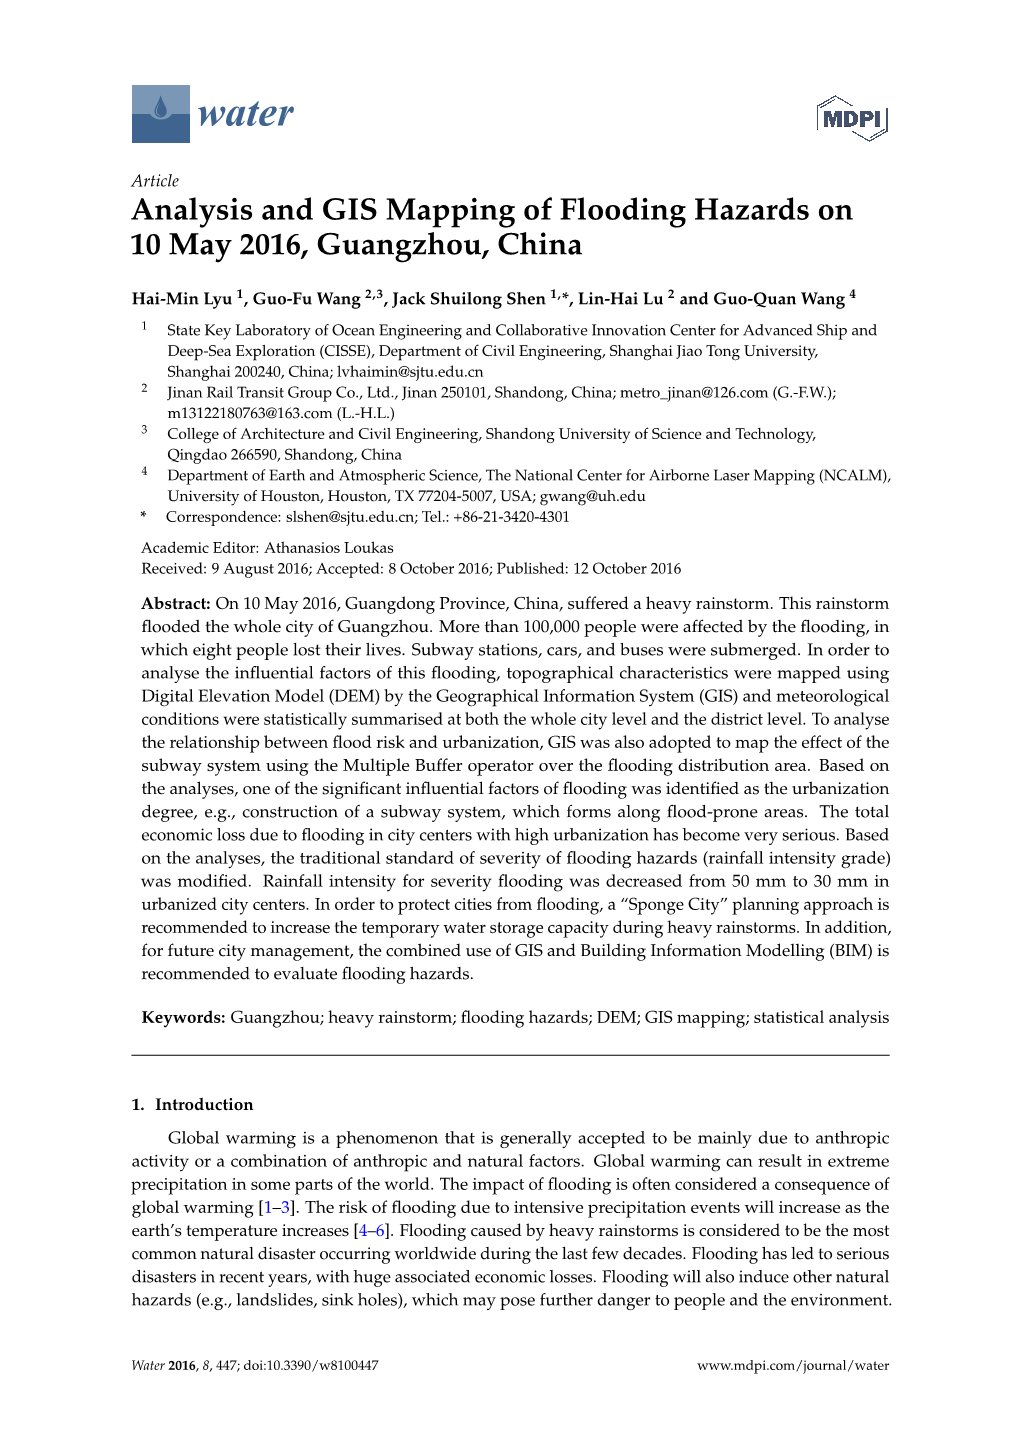 Analysis and GIS Mapping of Flooding Hazards on 10 May 2016, Guangzhou, China